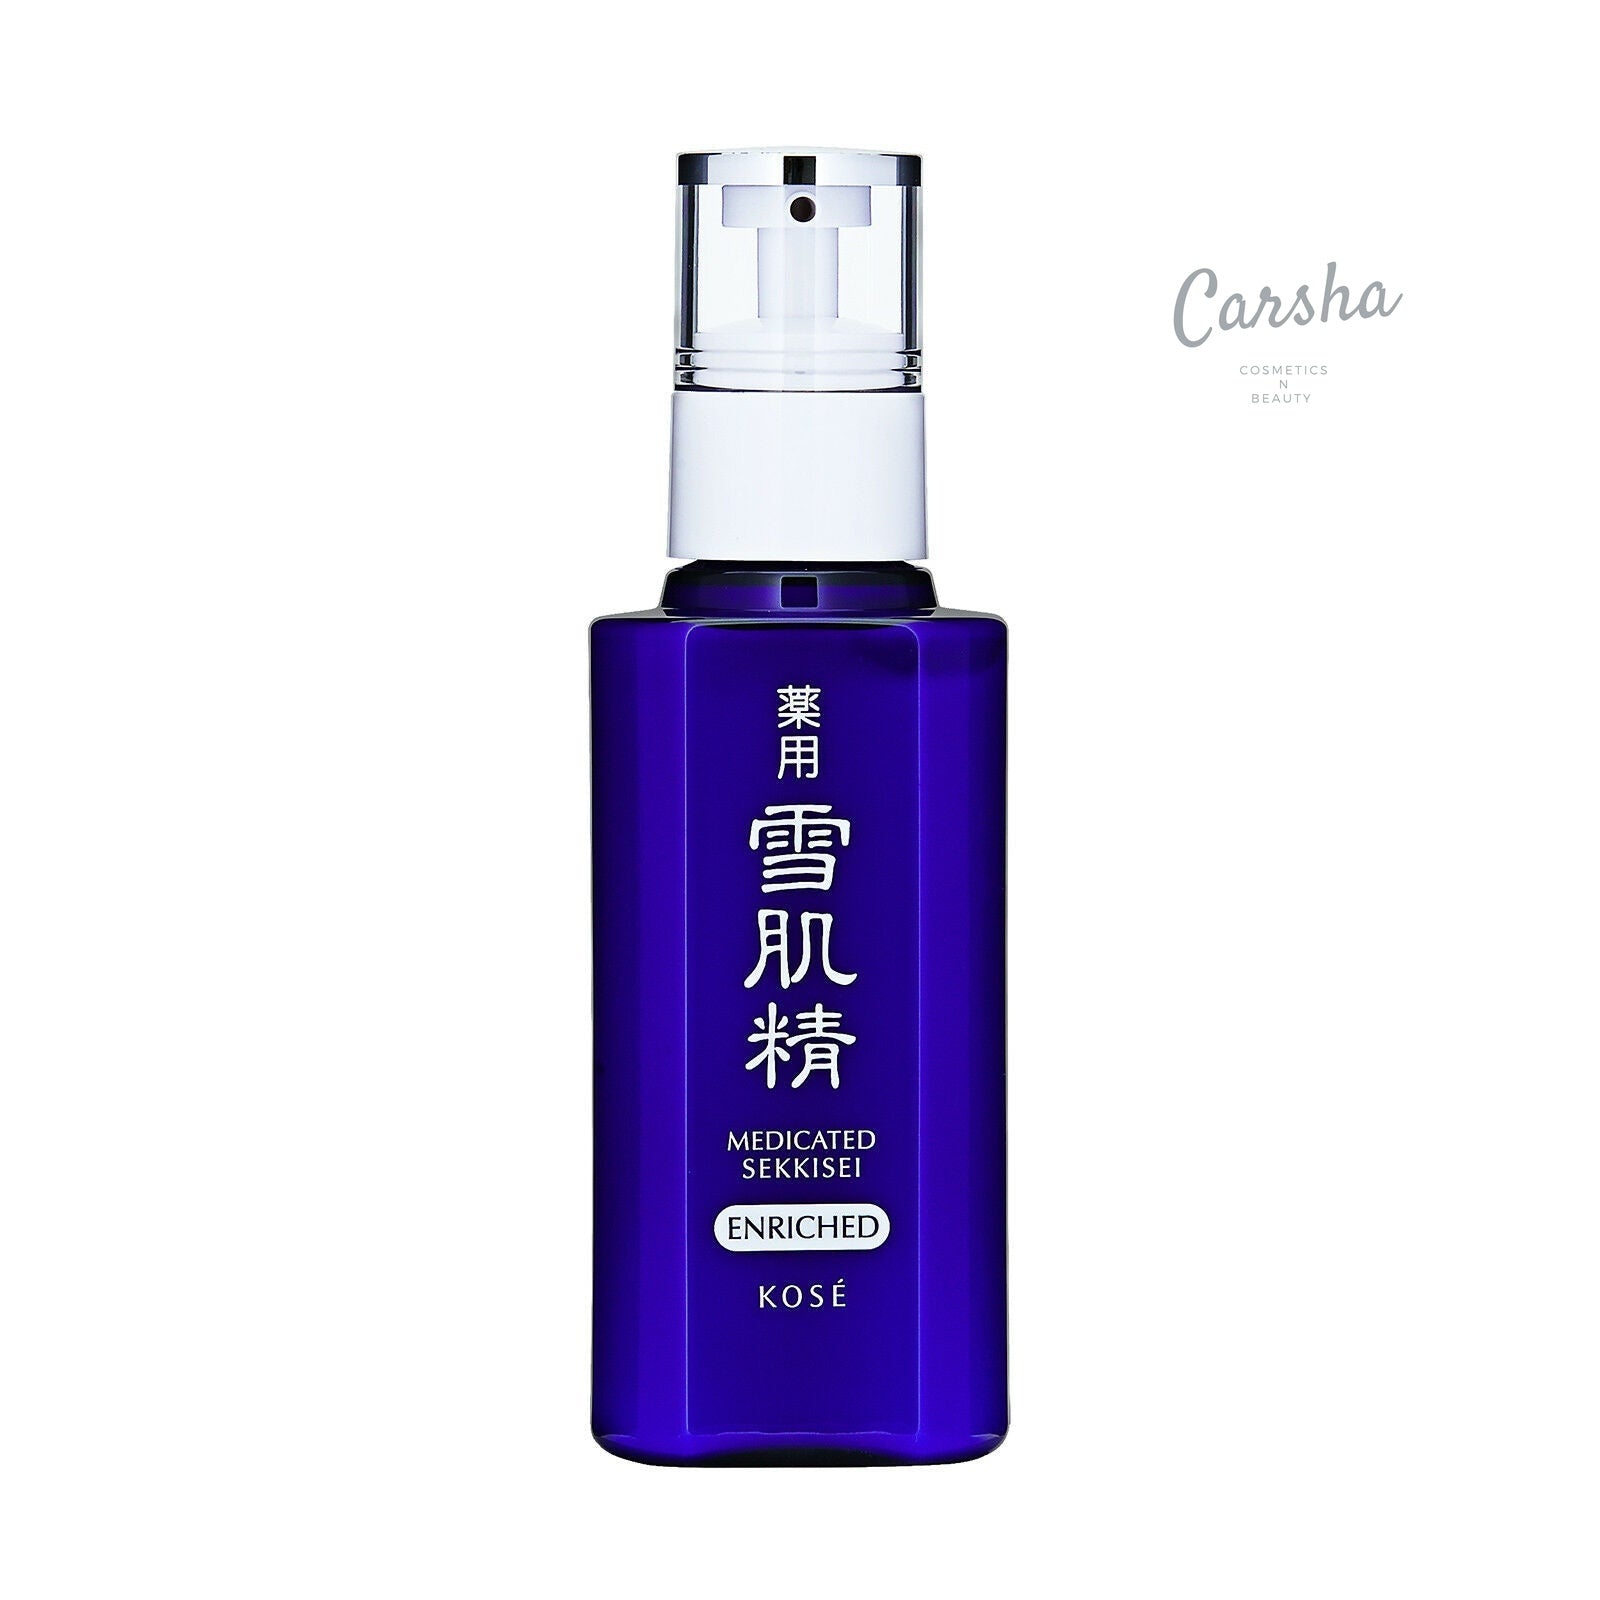 Sekkisei (new) Emulsion Enriched (intensify Hydration) | Carsha